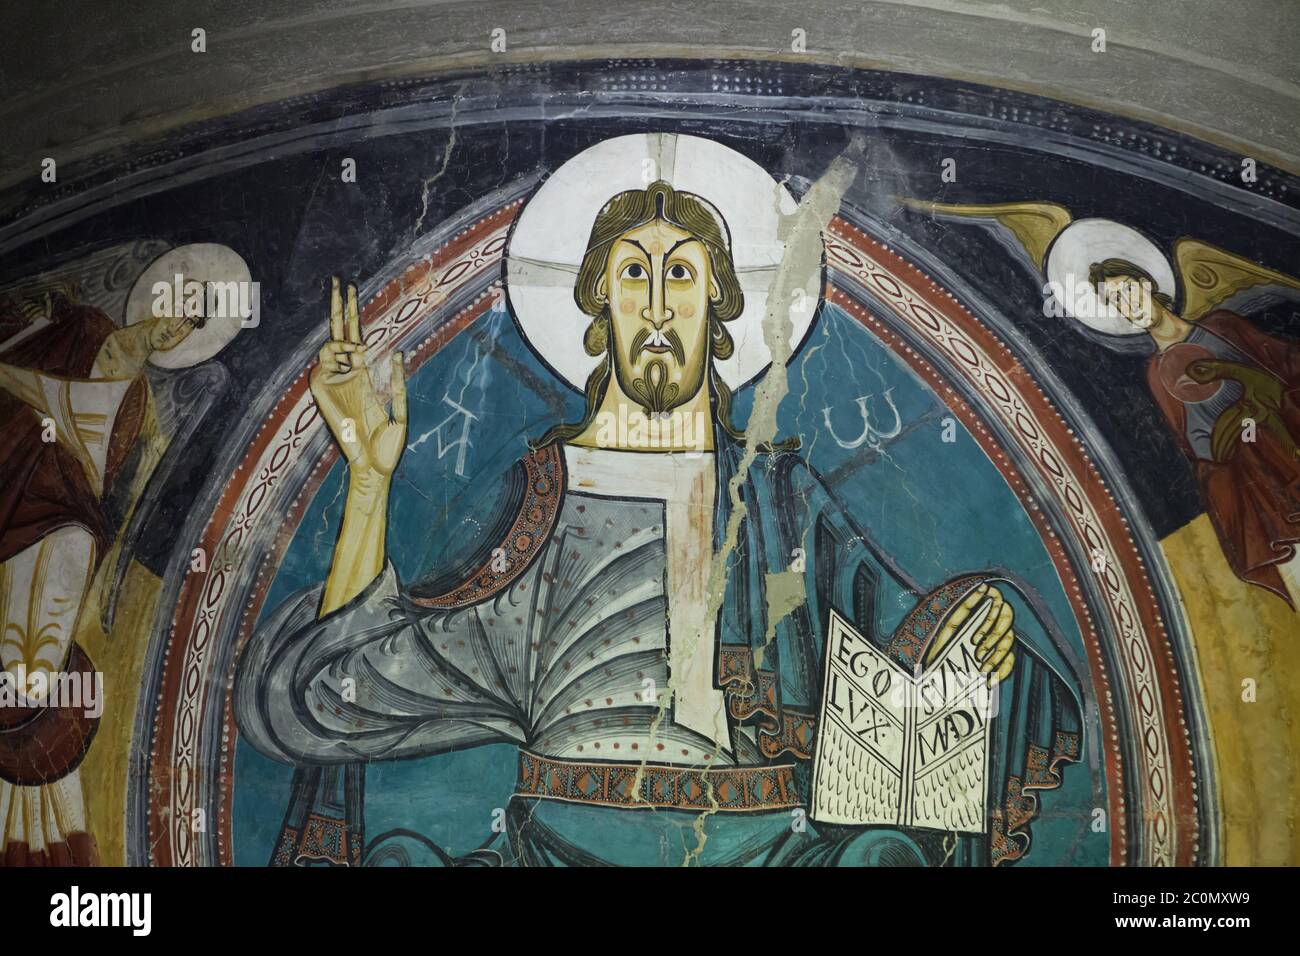 Jesus Christ in Majesty depicted in the medieval Romanesque fresco finished before 1123 from the church of Sant Climent de Taüll in the area of Vall de Boí in Alta Ribagorça in Catalonia, Spain, now on display in the National Art Museum of Catalonia (Museu Nacional d'Art de Catalunya) in Barcelona, Catalonia, Spain. Stock Photo